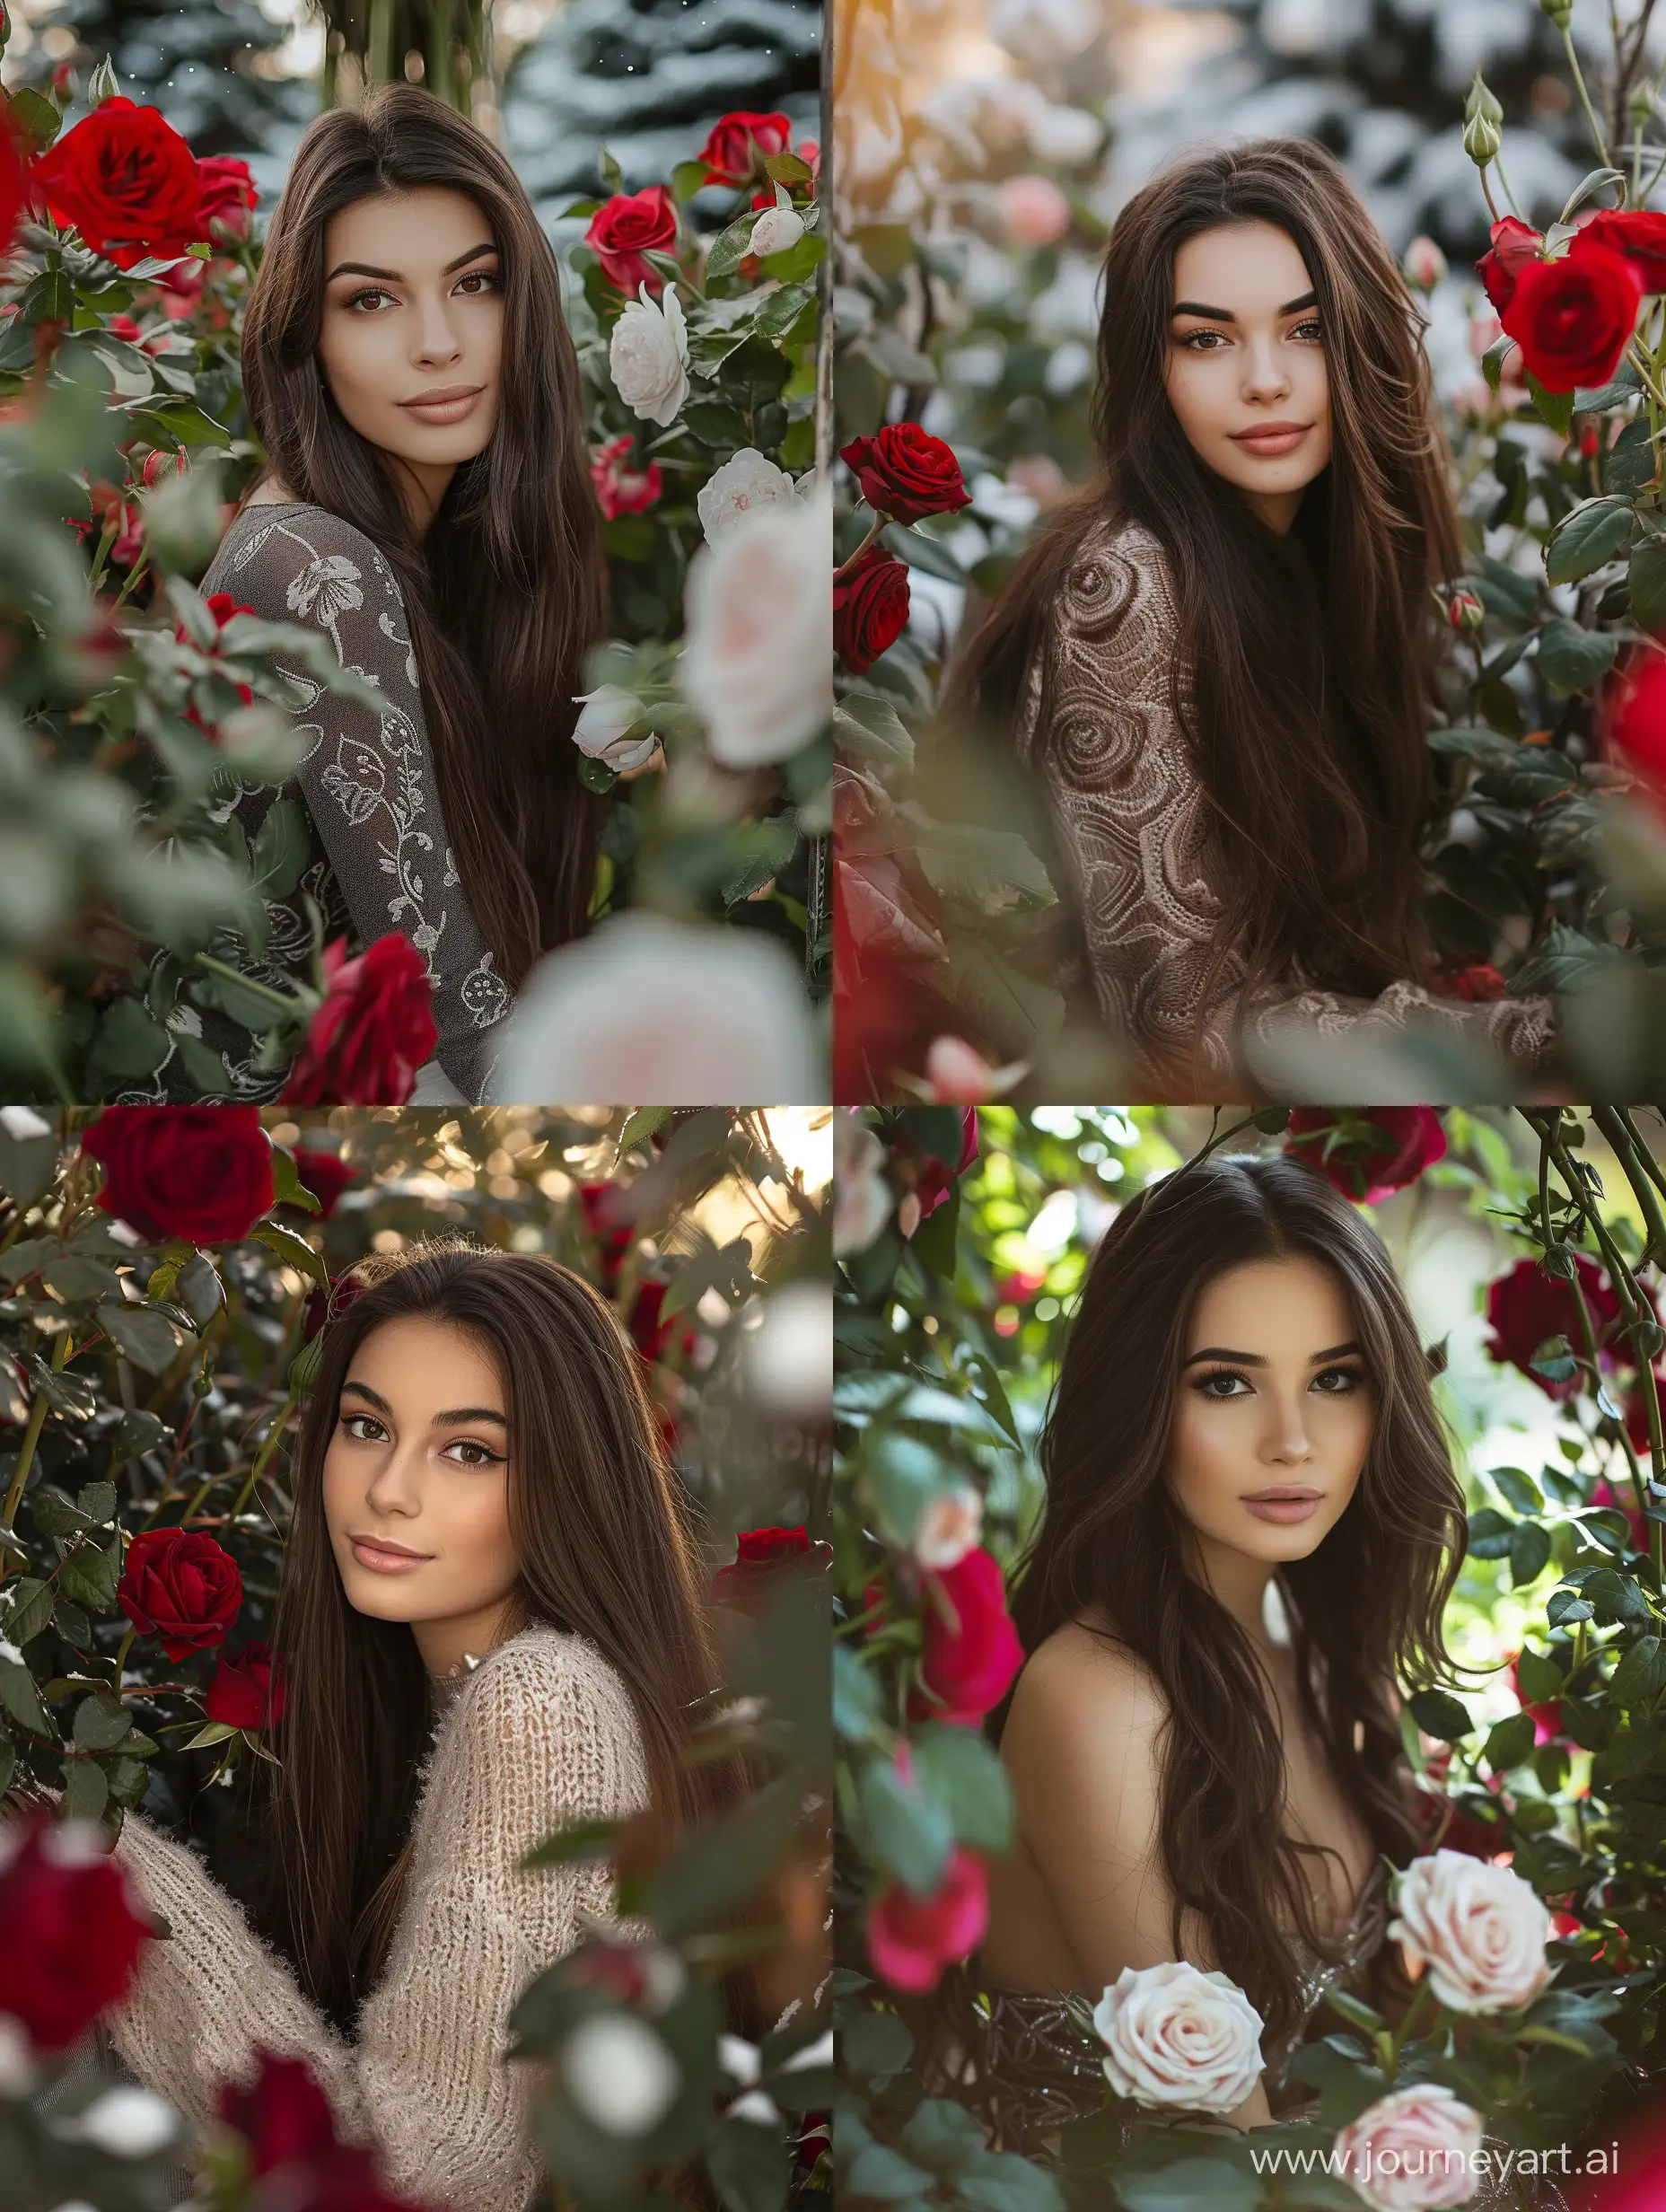 happy valentines day, a  beautiful women, she's sitting between rose flowers, dark long brown hair, brown eyes, a little smile on her face , high detailed photo, full body pose photography, winter dress, garden background